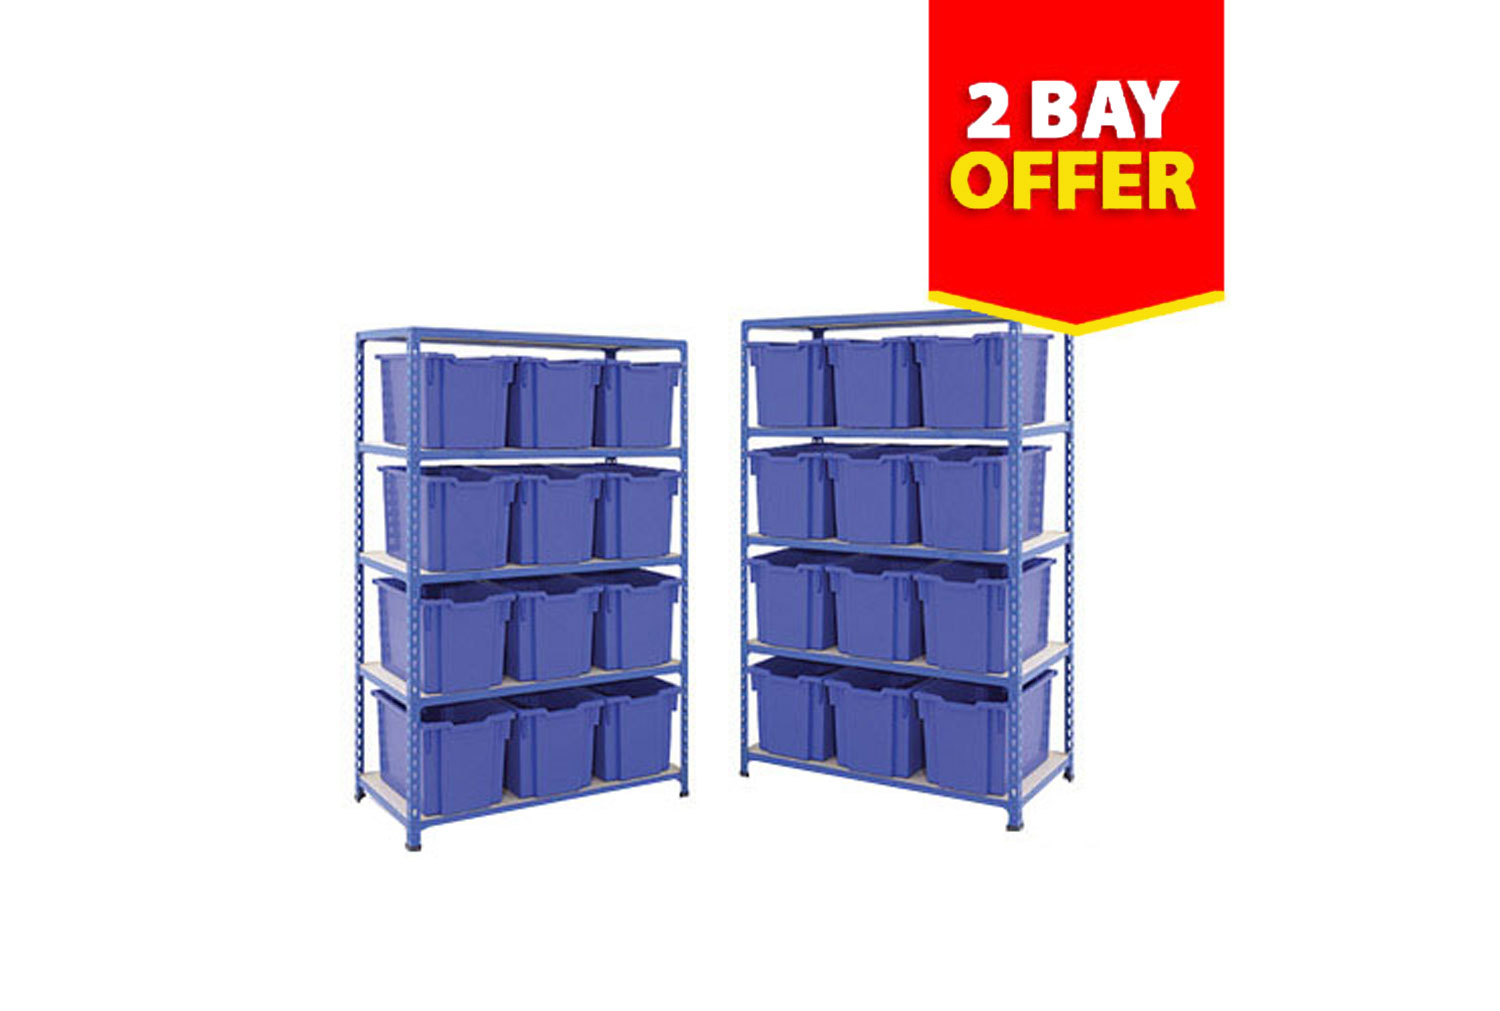 Rapid 2 Shelving Bay Bundle Deal With 24 Jumbo Gratnells Trays, Blue, Express Delivery